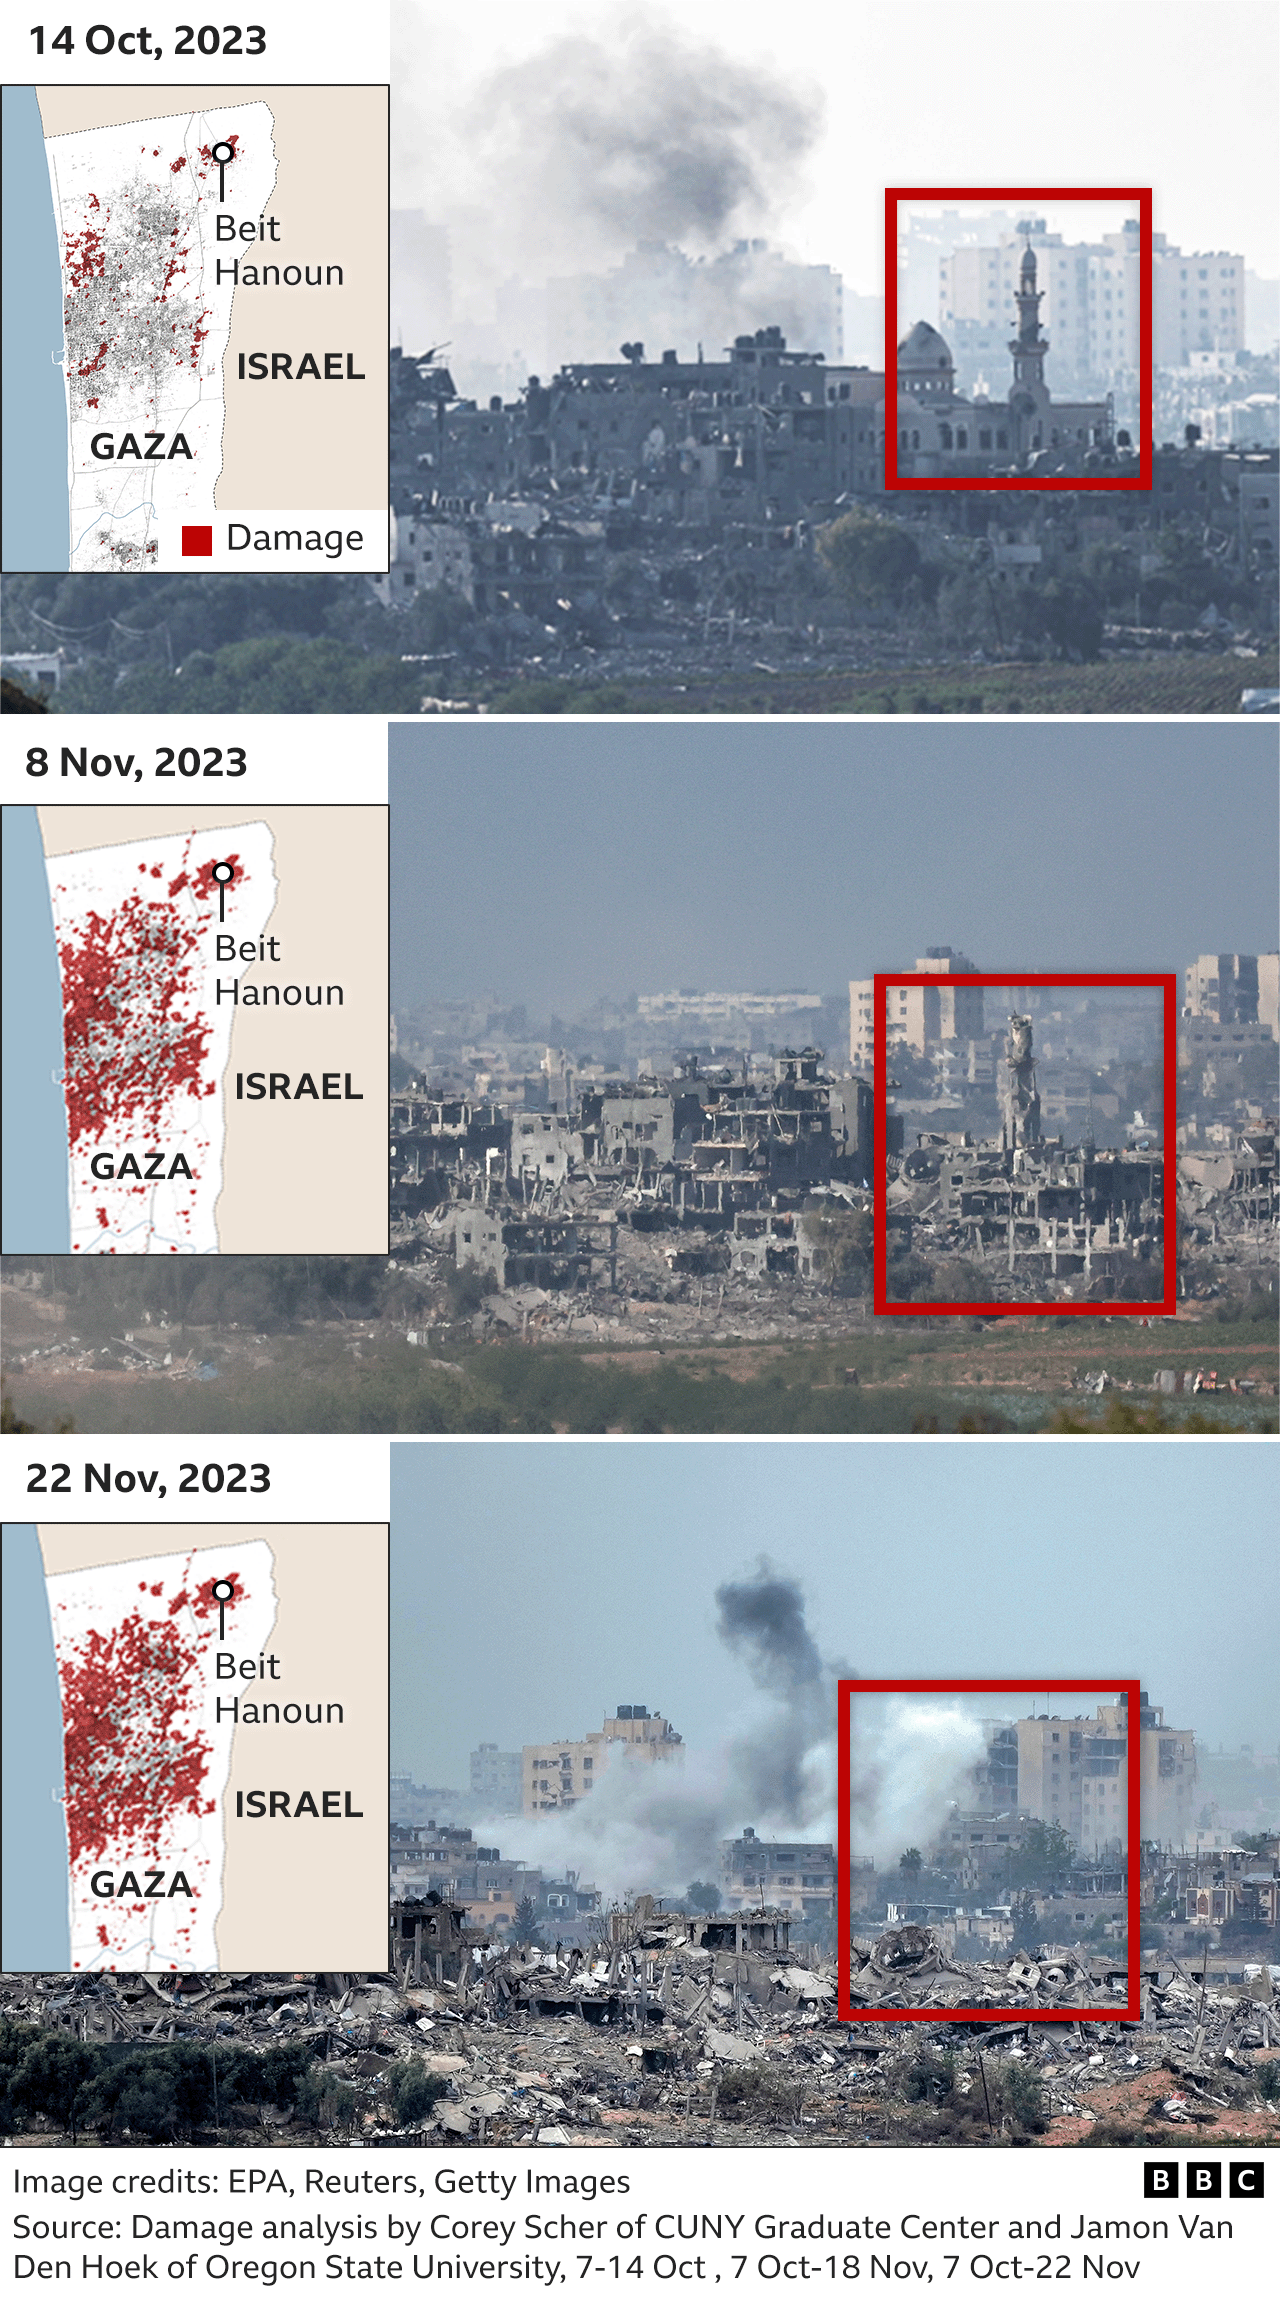 Three images showing the destruction of the Beit Hanoun skyline as seen from Sderot in Israel